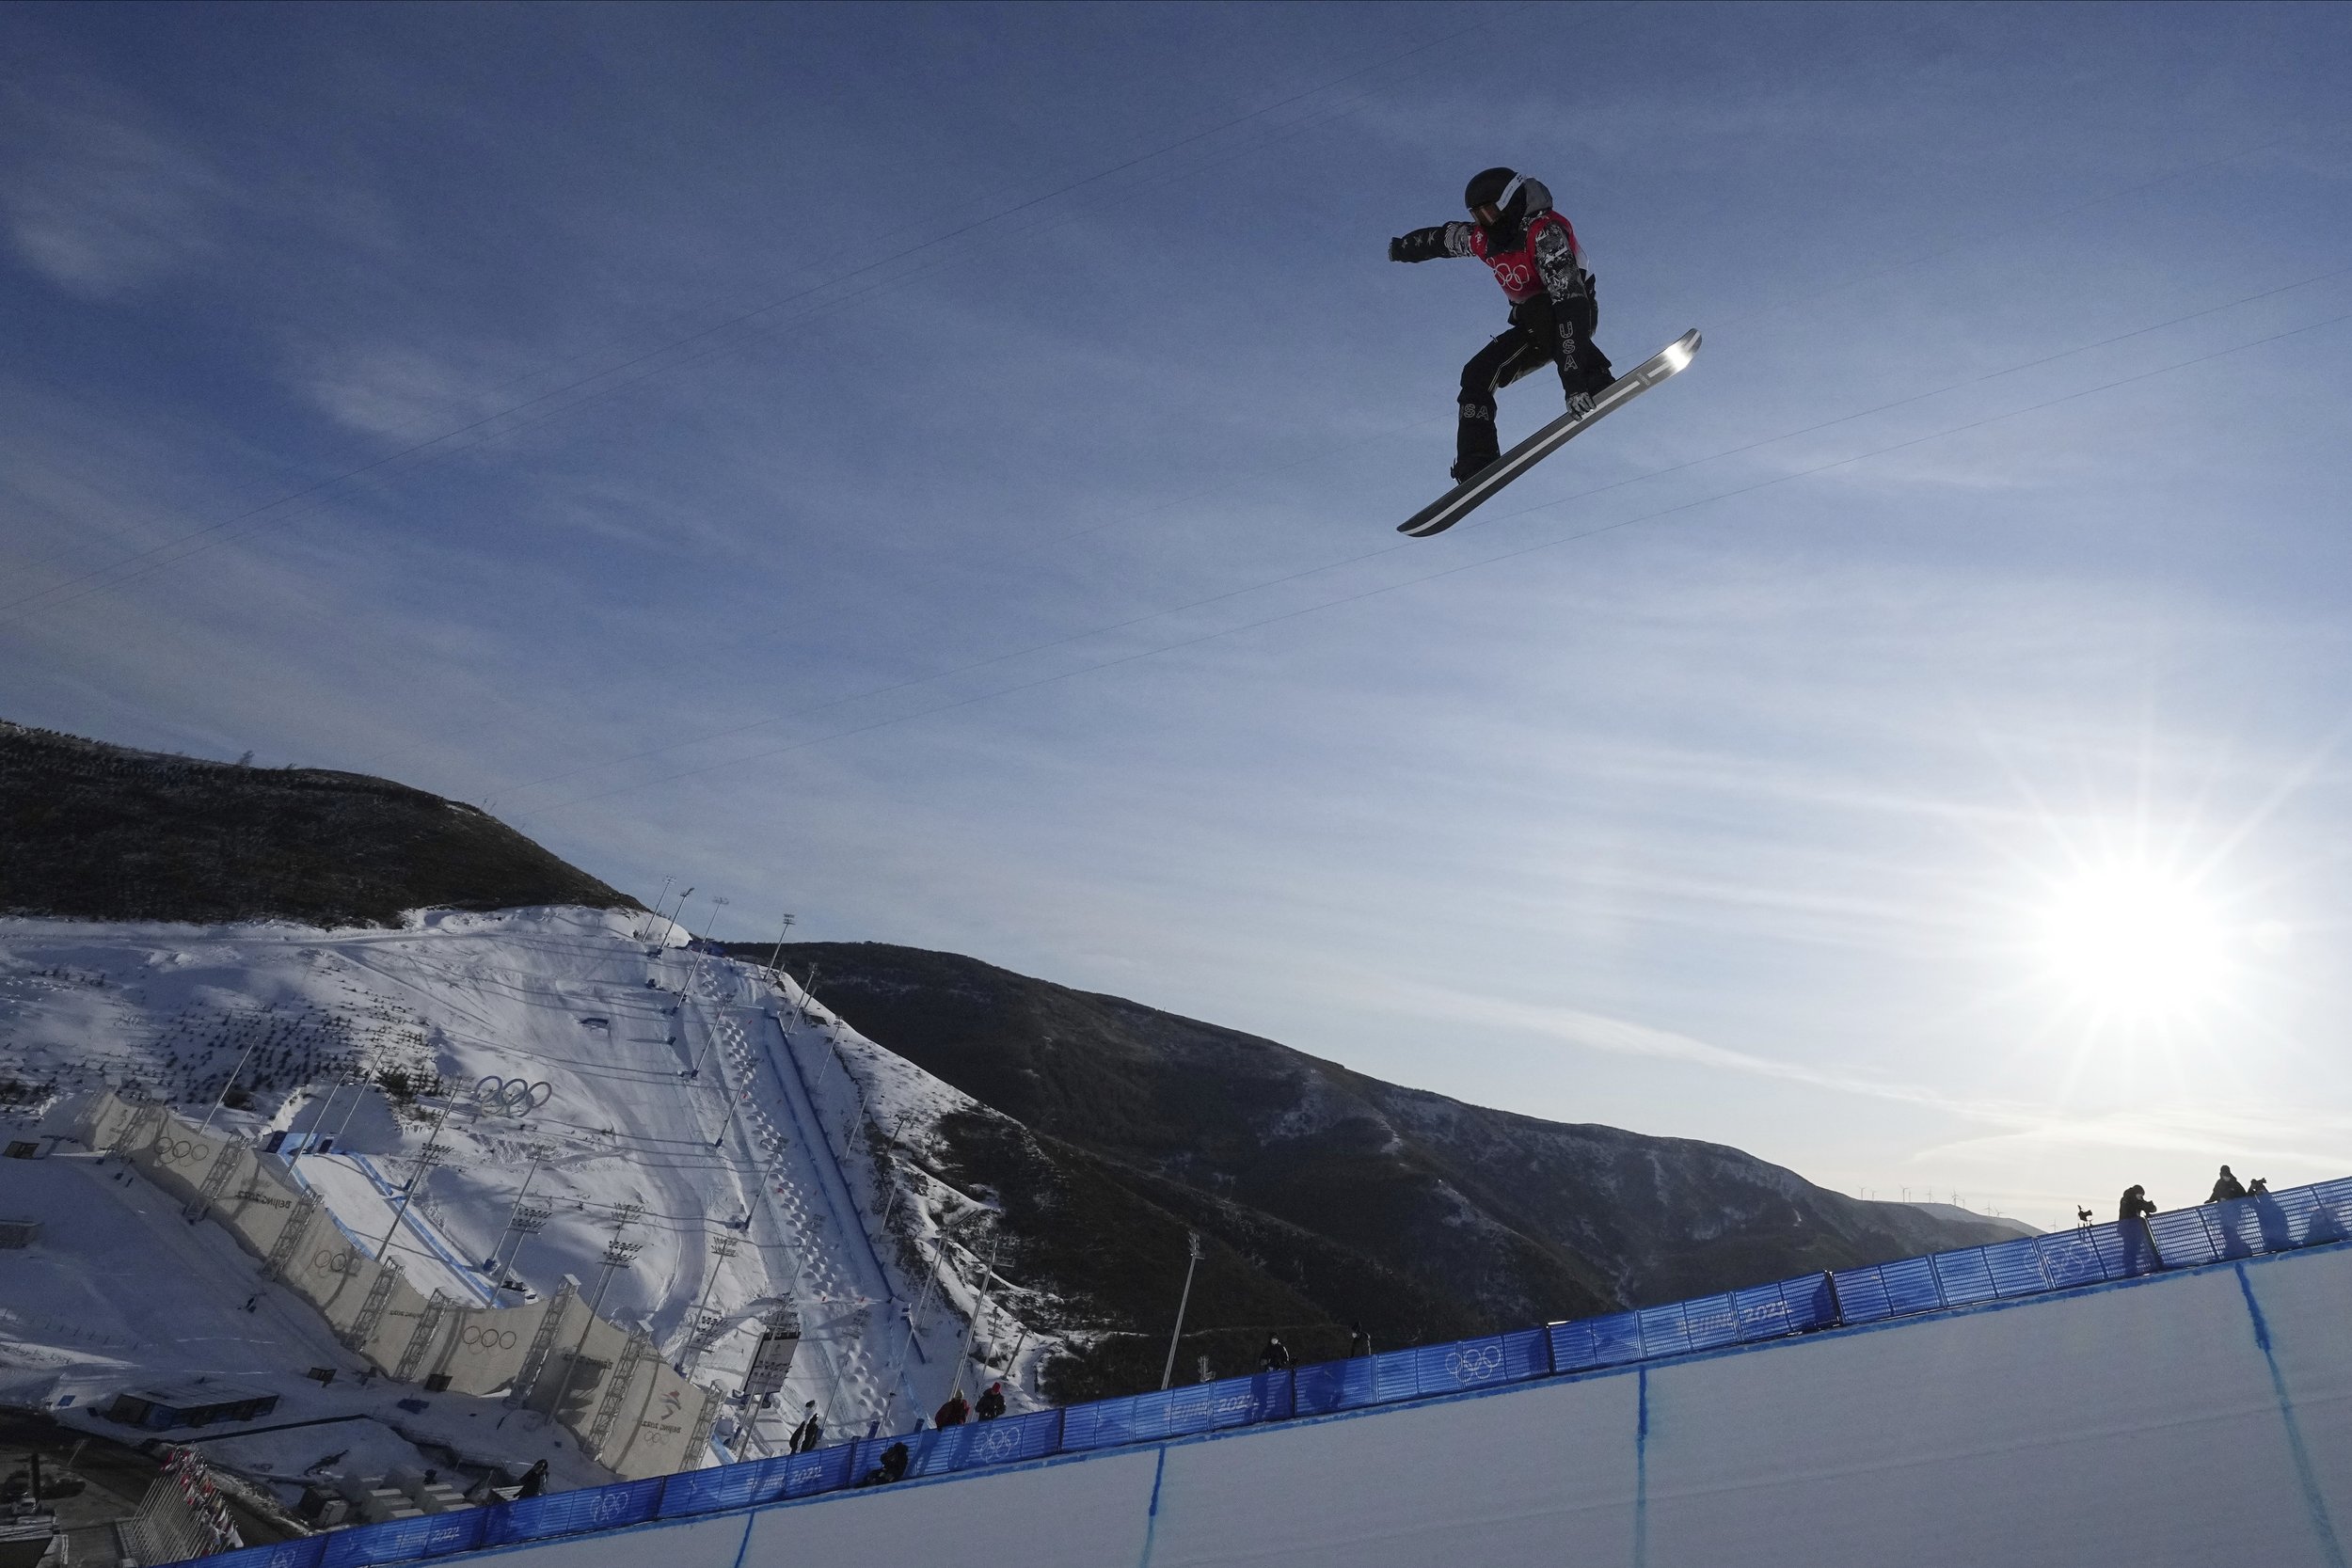  United States' Shaun White trains before the men's halfpipe finals at the 2022 Winter Olympics, Friday, Feb. 11, 2022, in Zhangjiakou, China. (AP Photo/Gregory Bull) 